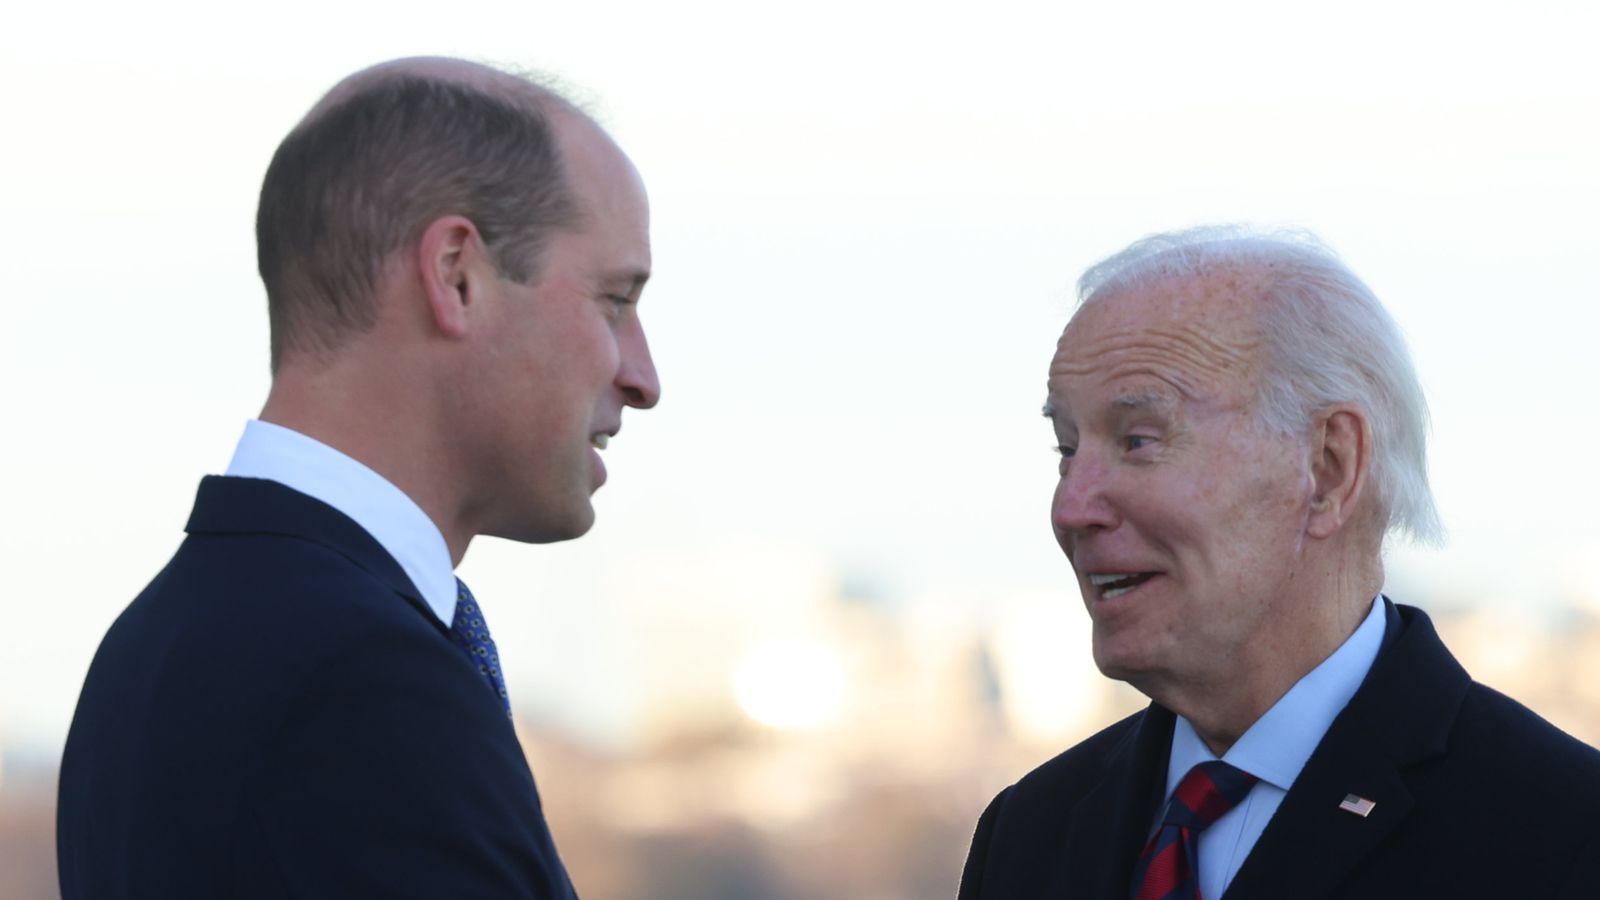 Prince William meets President Joe Biden for ‘warm, friendly and substantive discussion’ ahead of Earthshot Prize ceremony